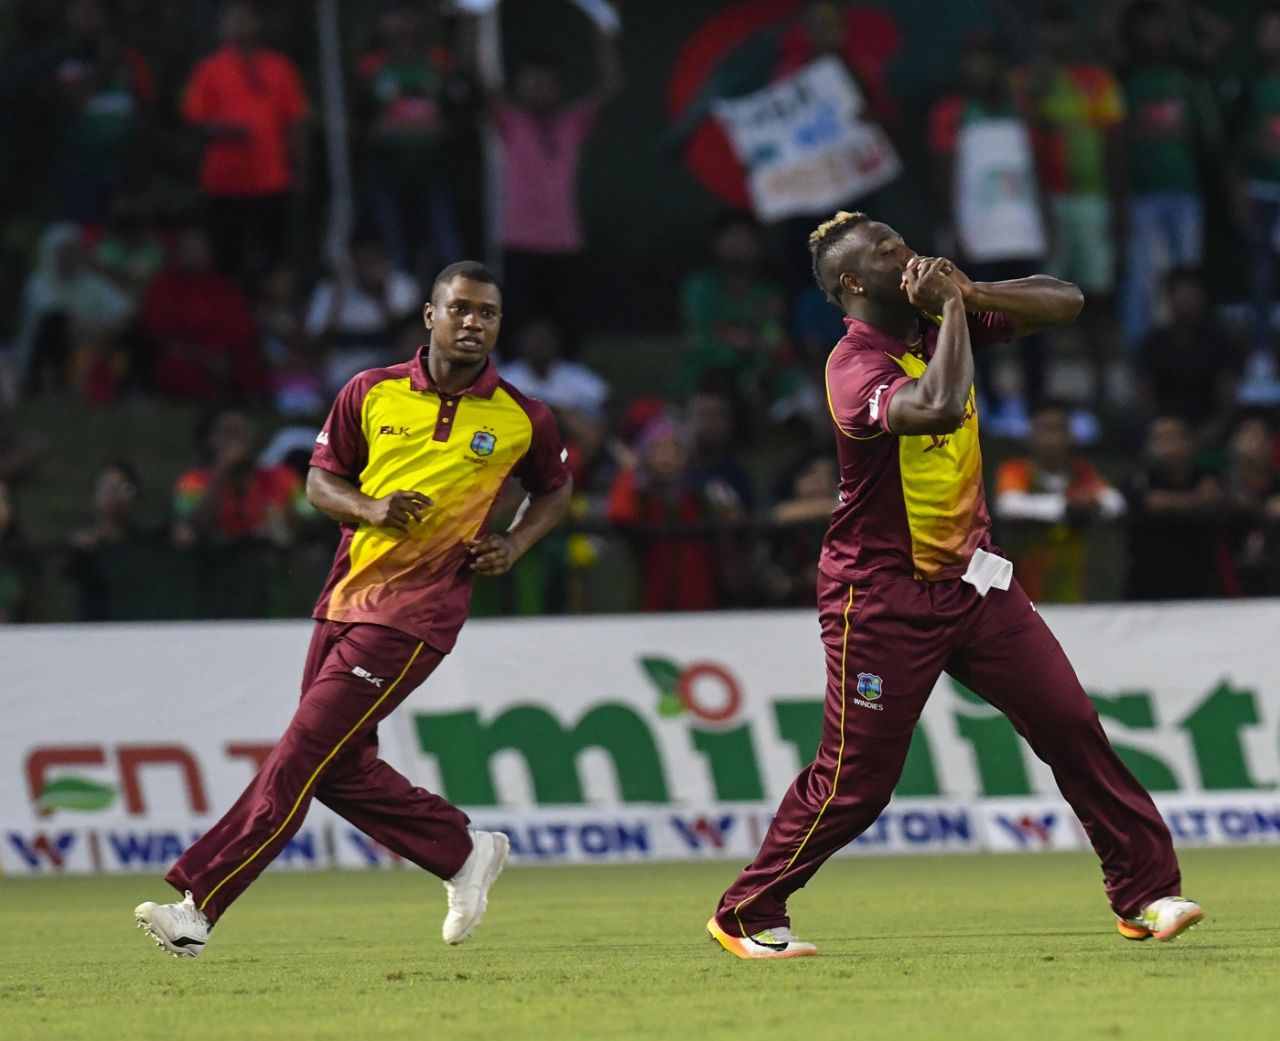 Andre Russell takes a catch with Evin Lewis looking on, West Indies v Bangladesh, 2nd T20I, Lauderhill, August 4, 2018